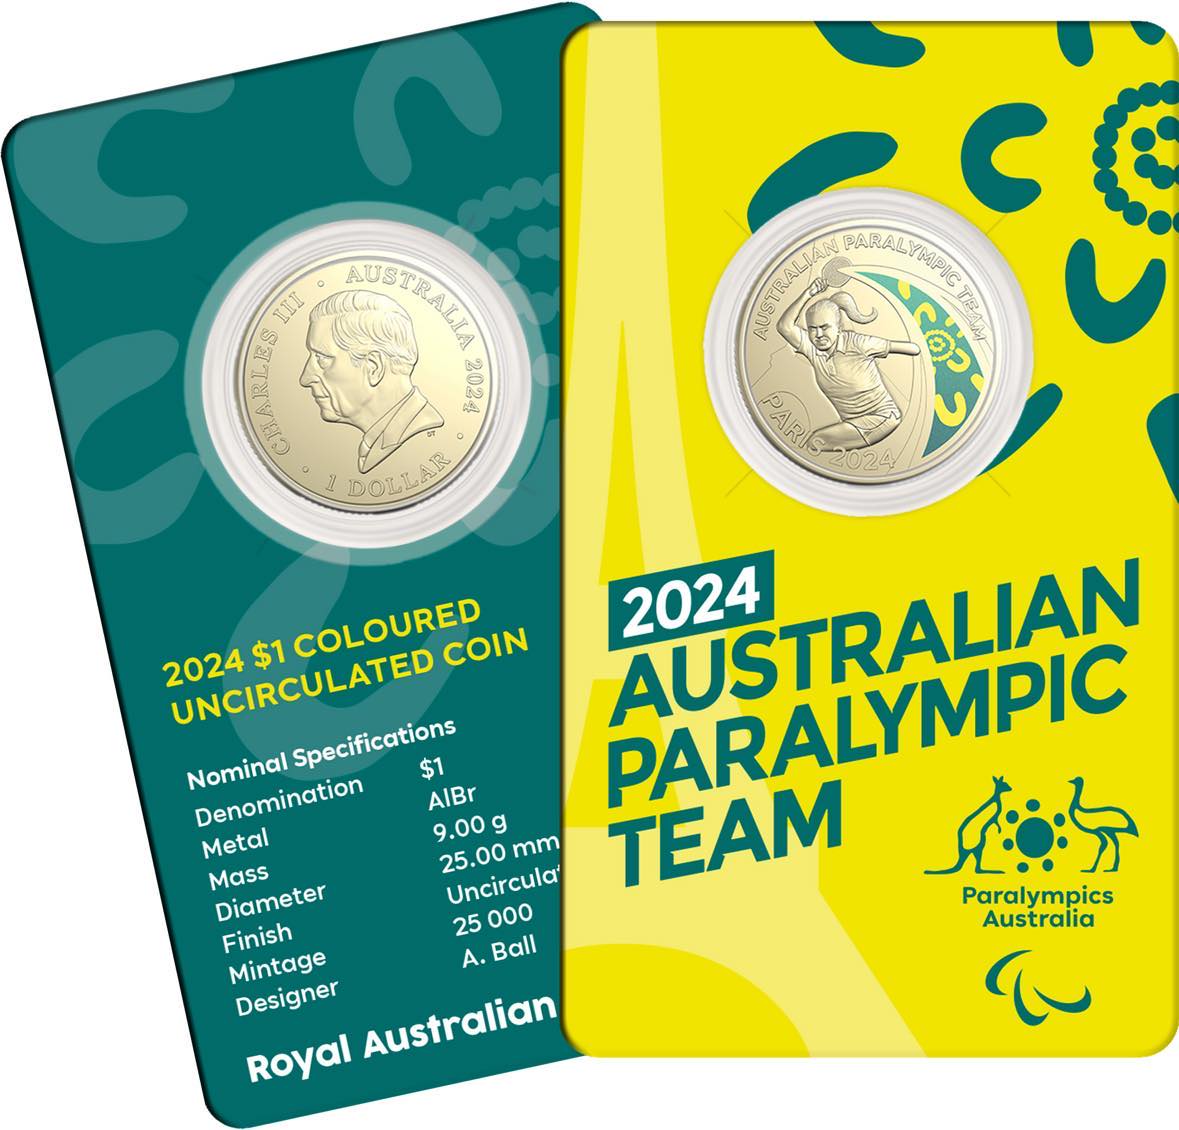 Australian Paralympic Team 2024 $1 Coloured Albr Uncirculated Coin *online*